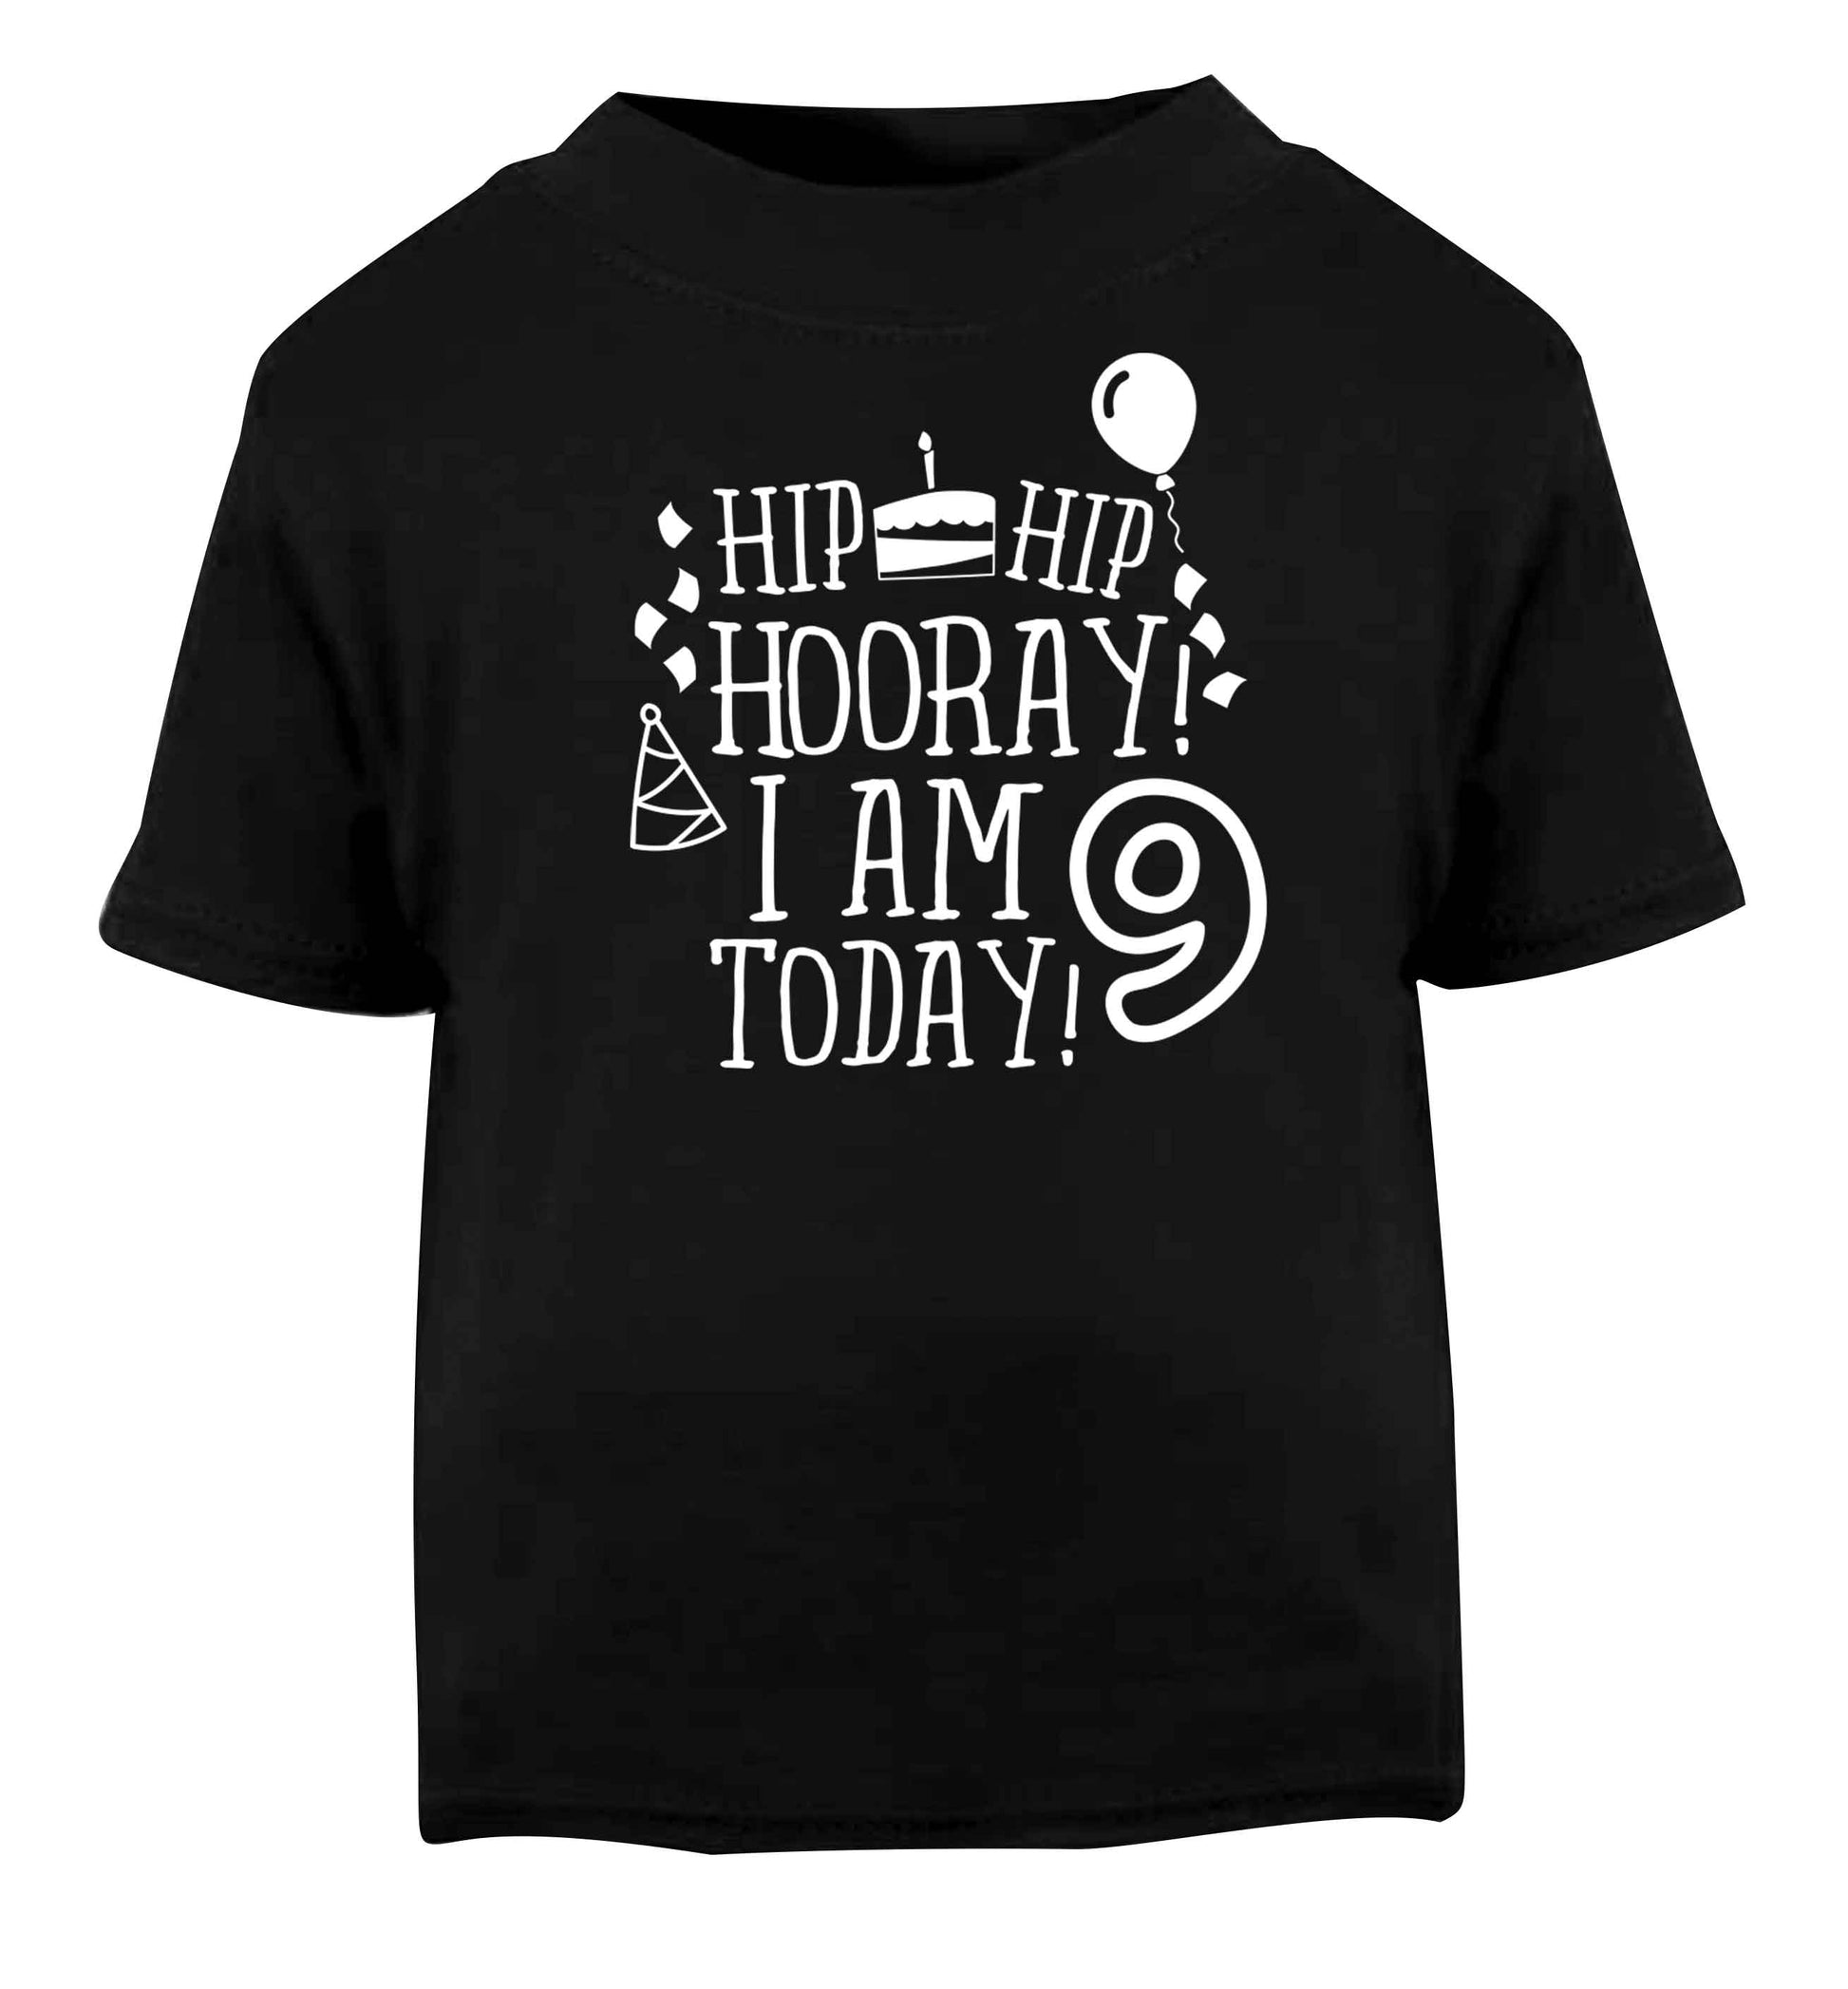 Hip hip hooray I am 9 today! Black baby toddler Tshirt 2 years